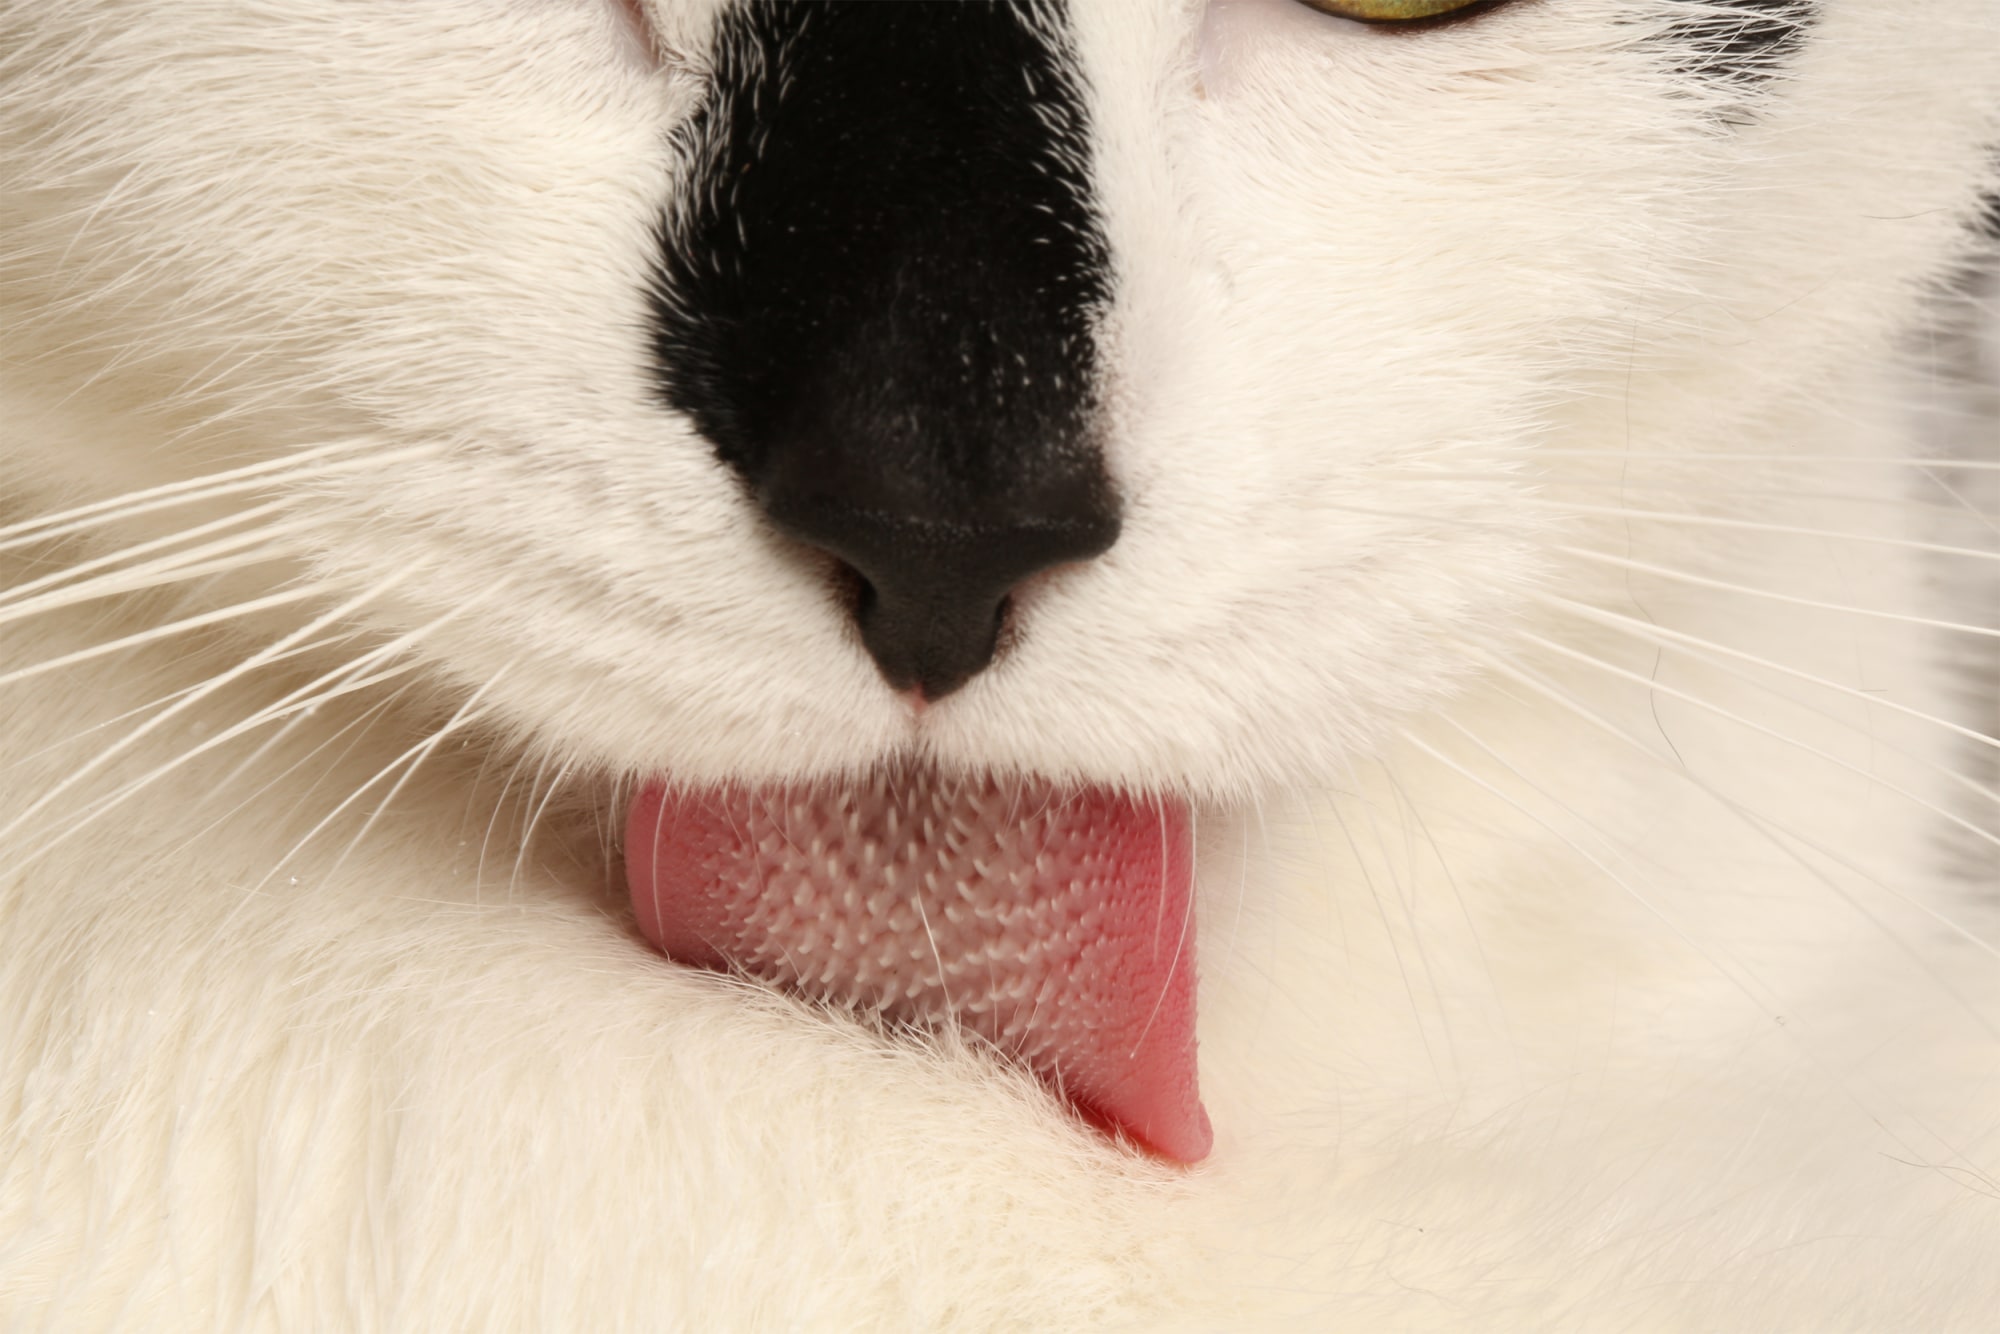 The Science of a Cat’s Tongue